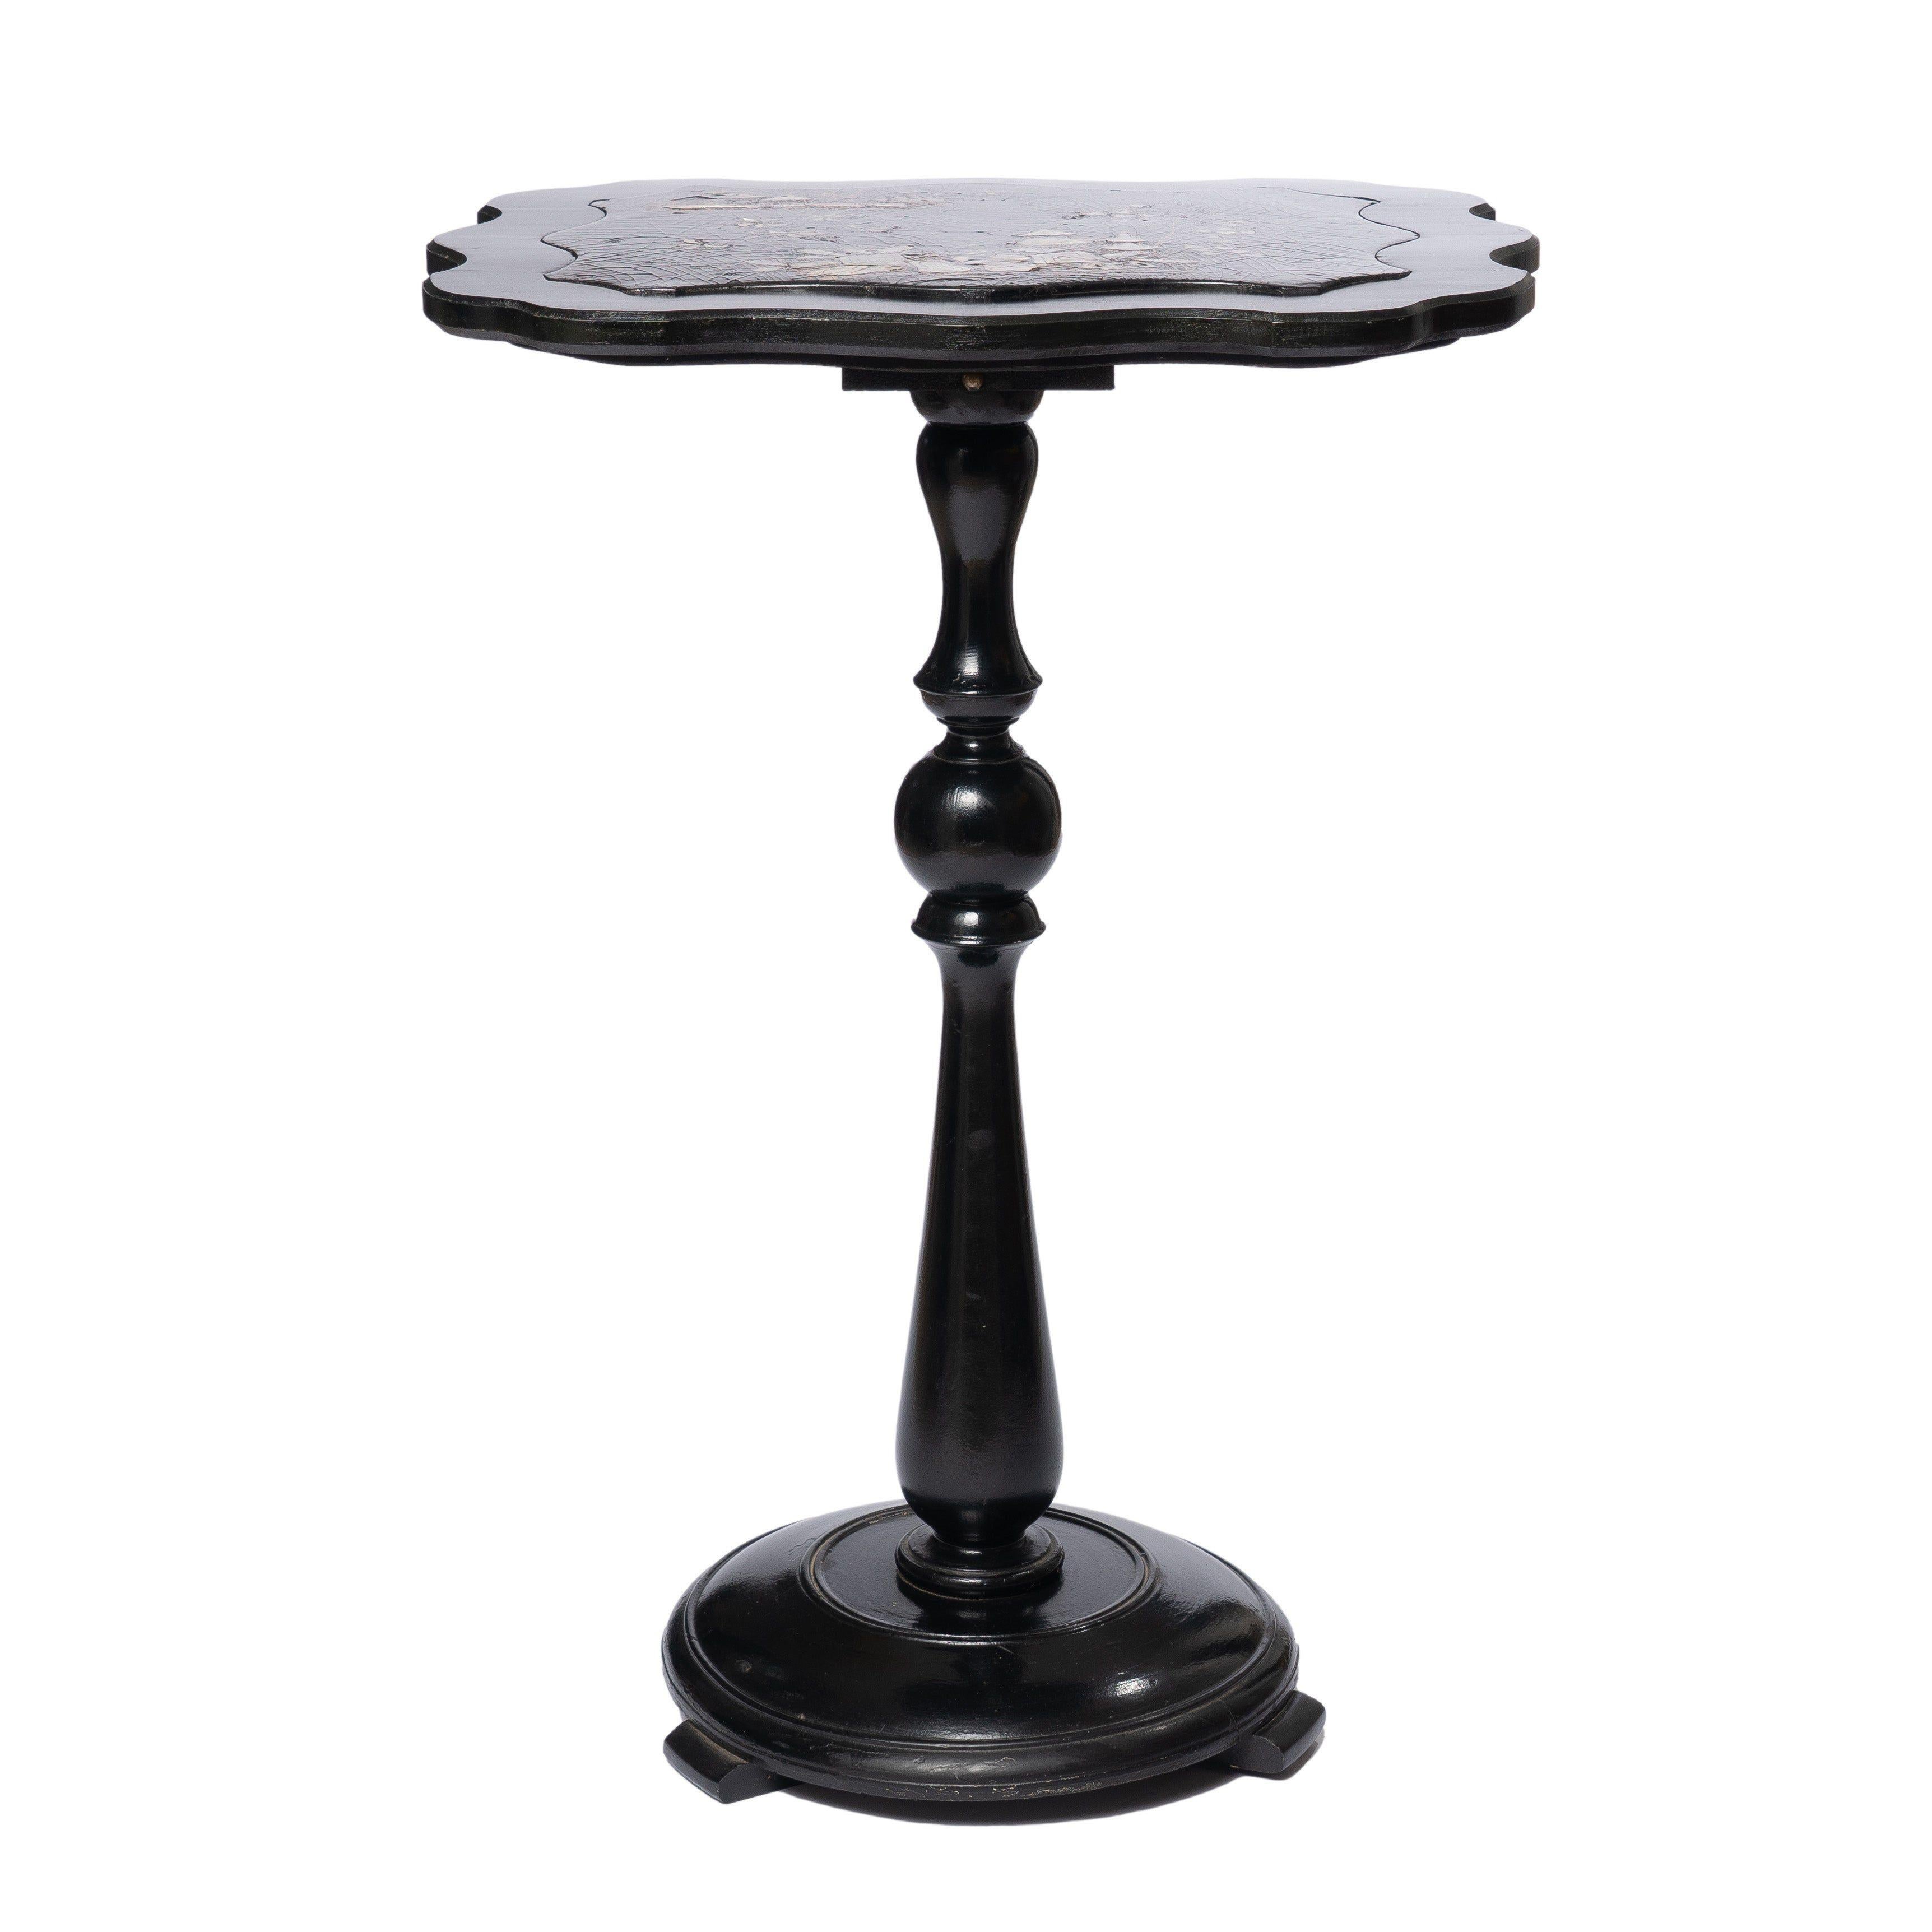 Mid-19th Century English Wood & Paper Mache Tilt Top Candle Stand, c. 1860 For Sale